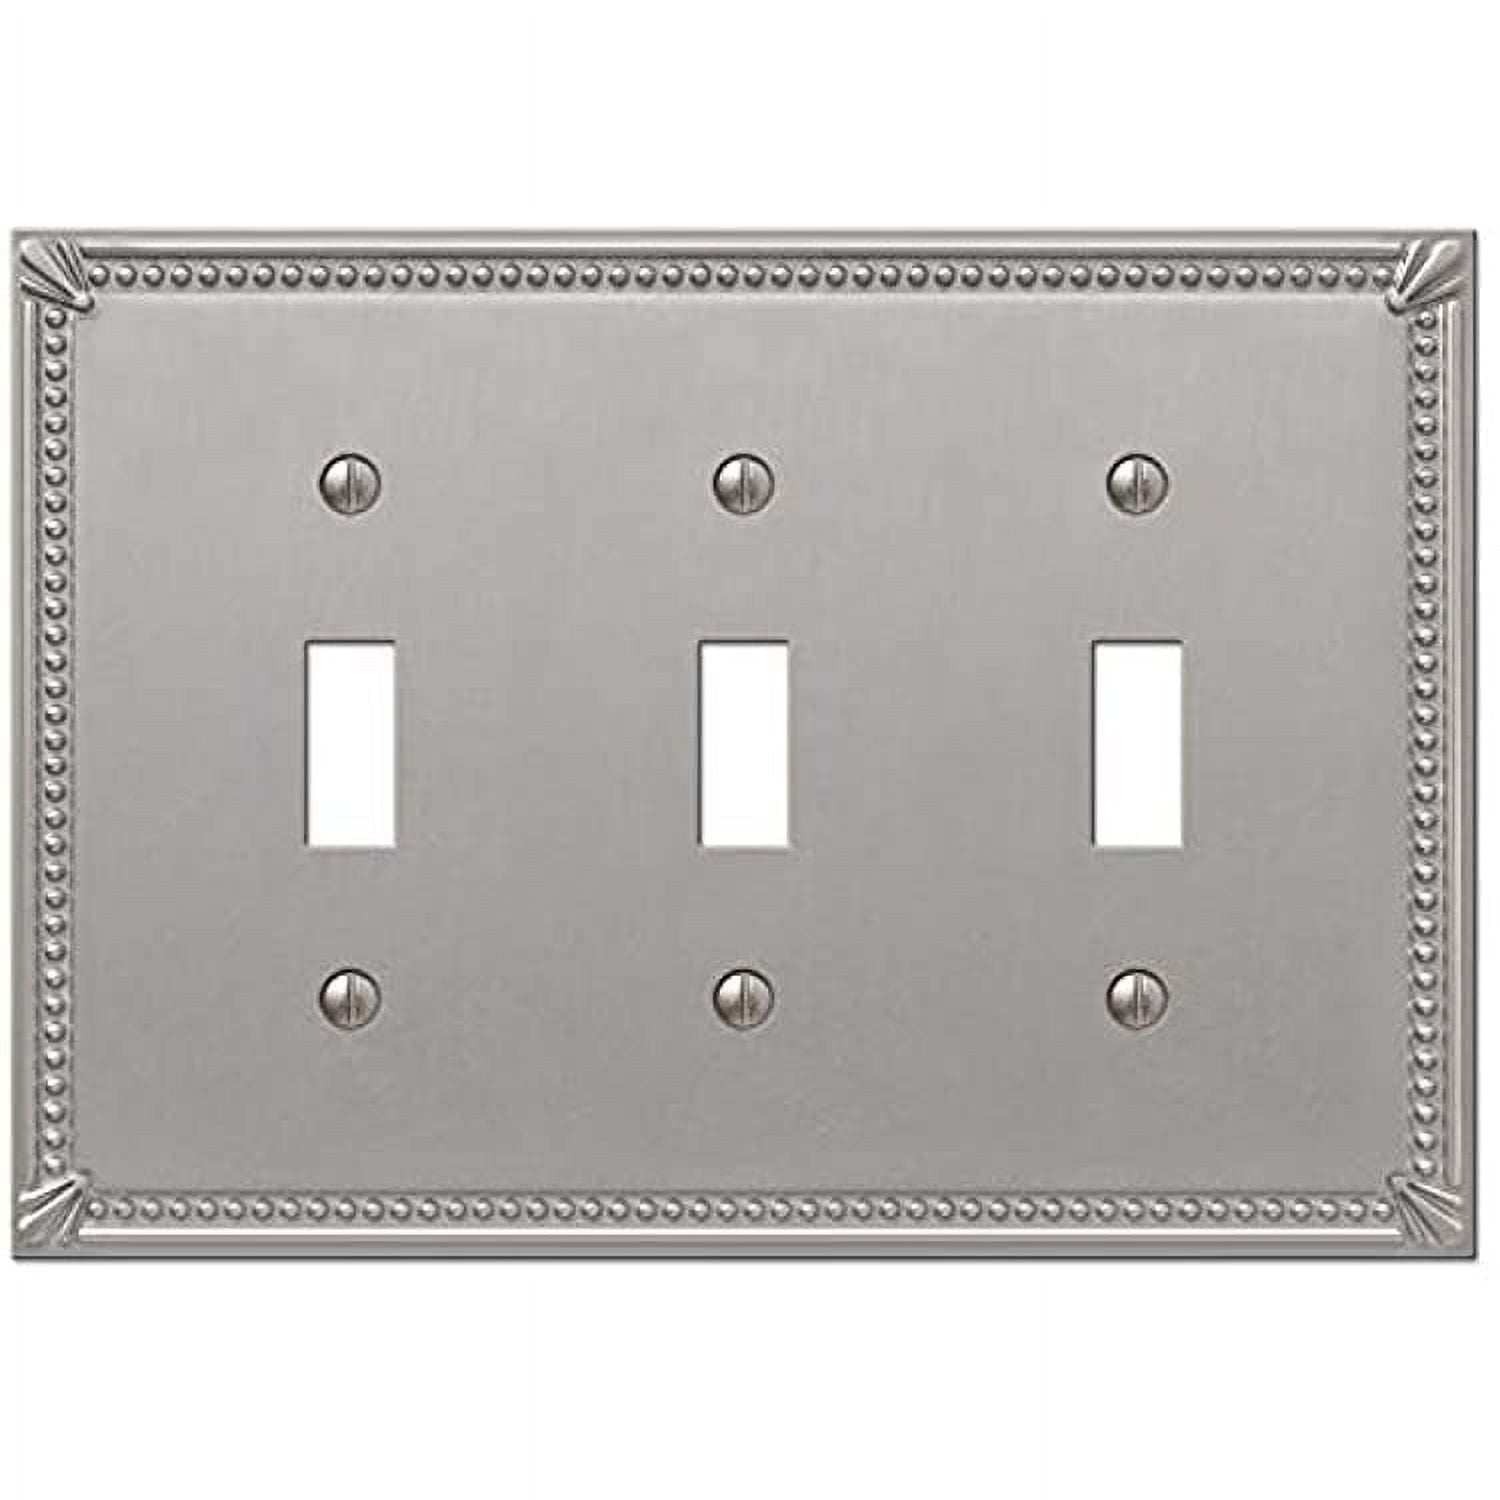 Picture of Amerelle 3009141 Imperial Bead Brushed Nickel 3 Gang Metal Toggle Wall Plate, Gray